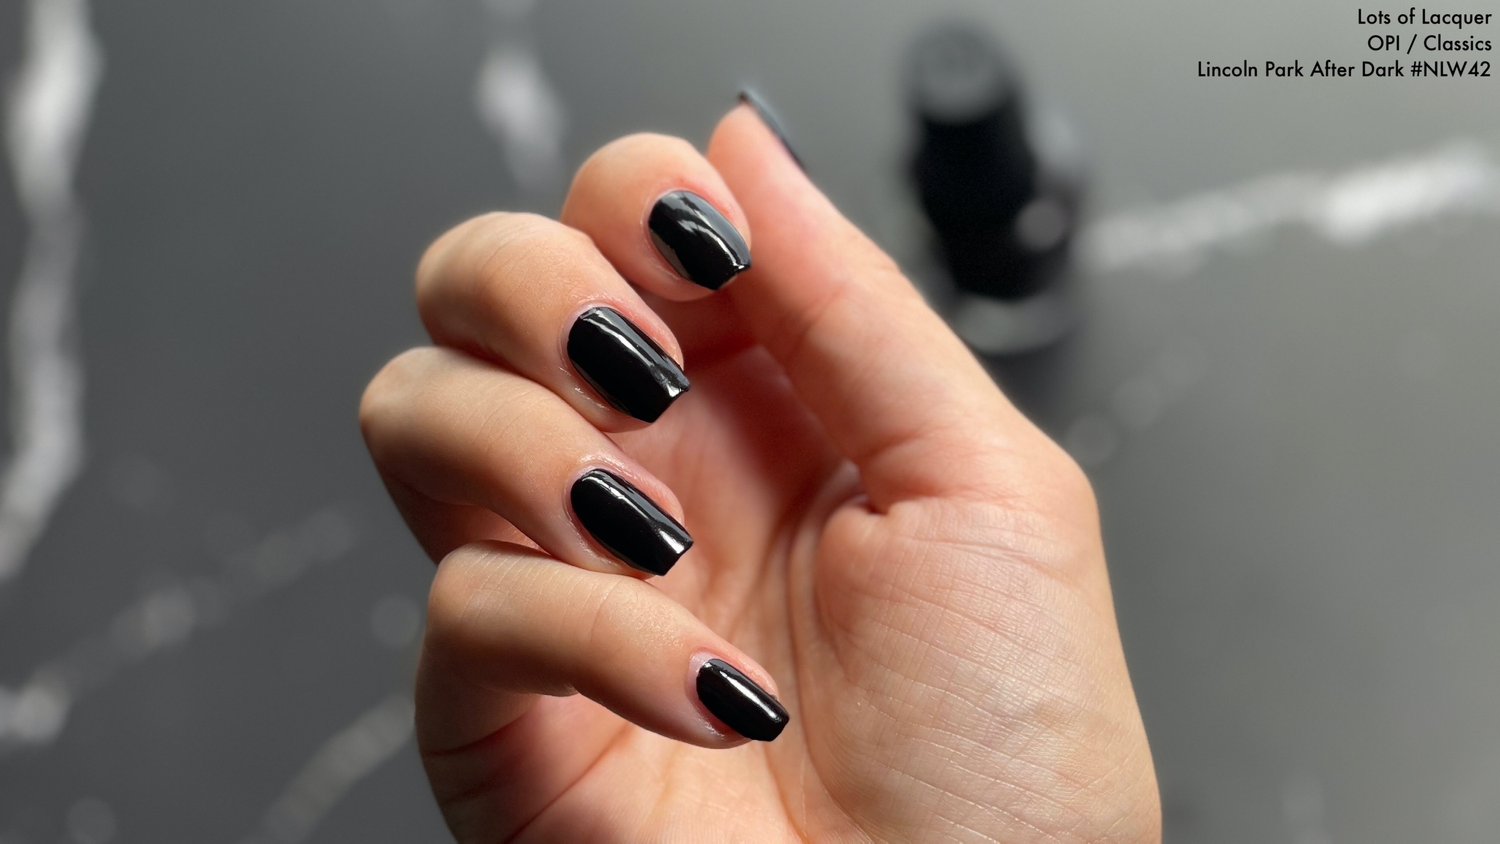 4. OPI "Lincoln Park After Dark" from the Chicago Collection - wide 4